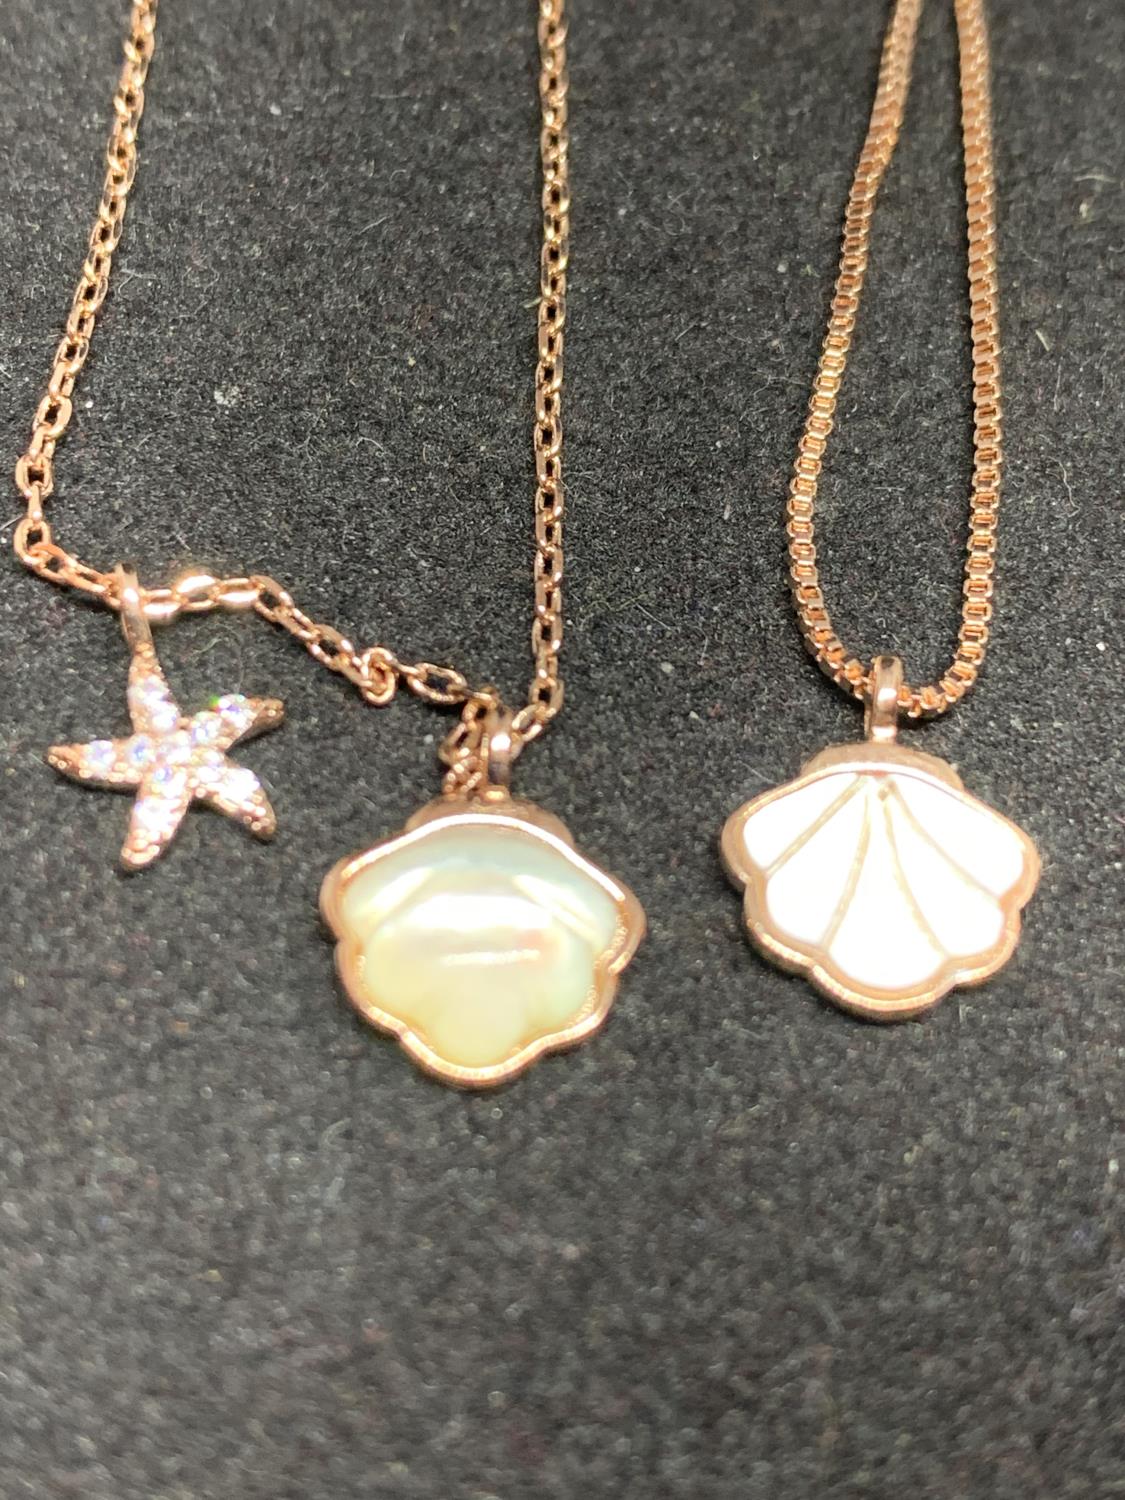 FOUR SILVER NECKLACES MARKED 925 WITH ROSE COLOURED GILDING WITH SHELL AND STAR FISH PENDANTS - Image 6 of 8